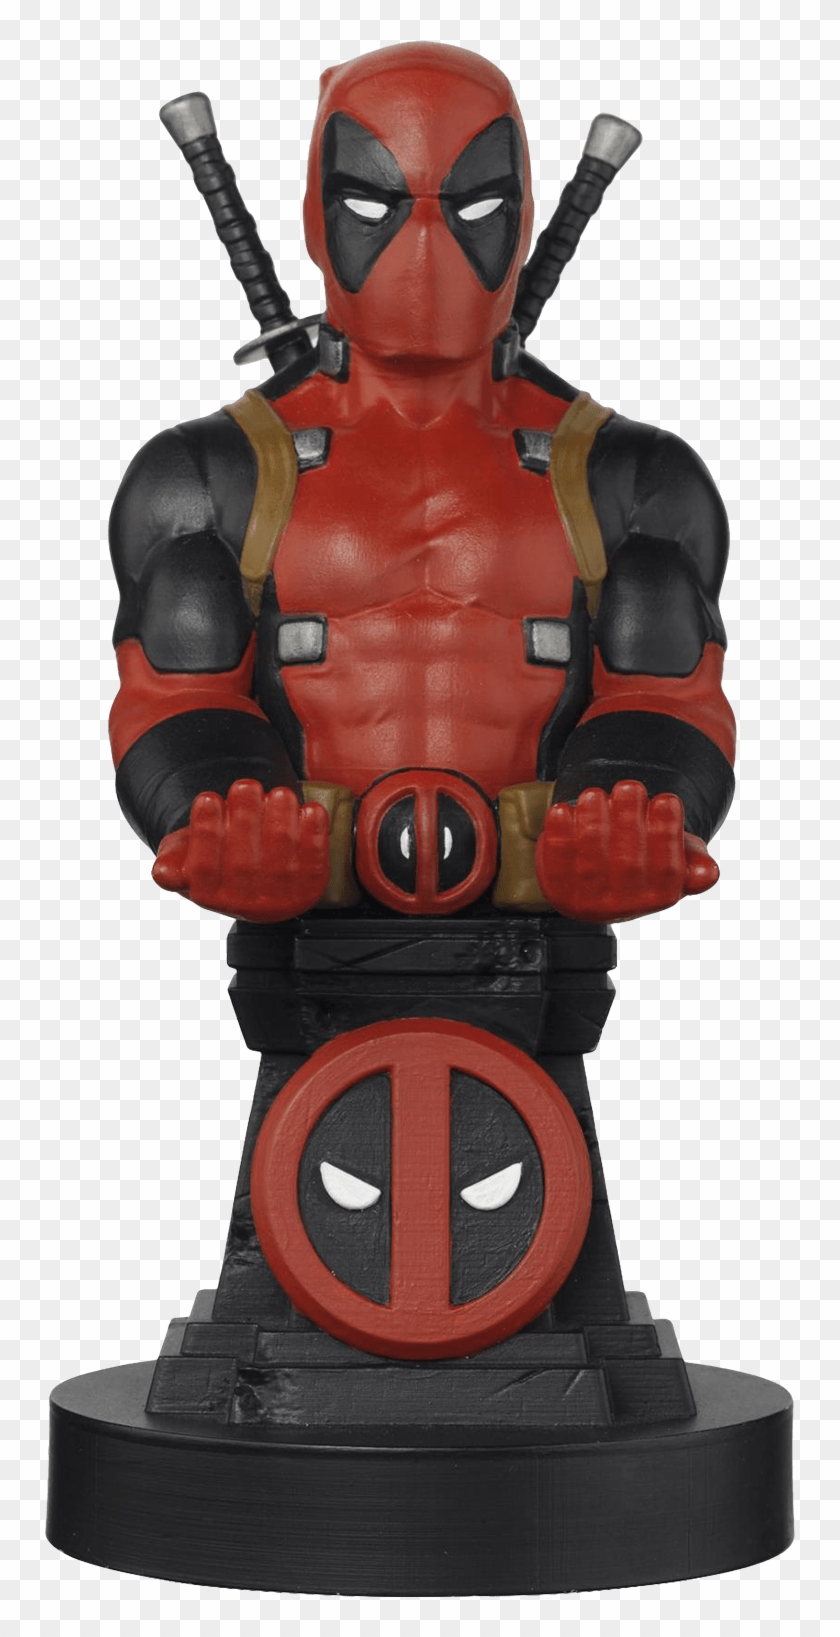 Cable Guys Phone Controller Holder Deadpool - Deadpool Cable Guy Clipart #3865997